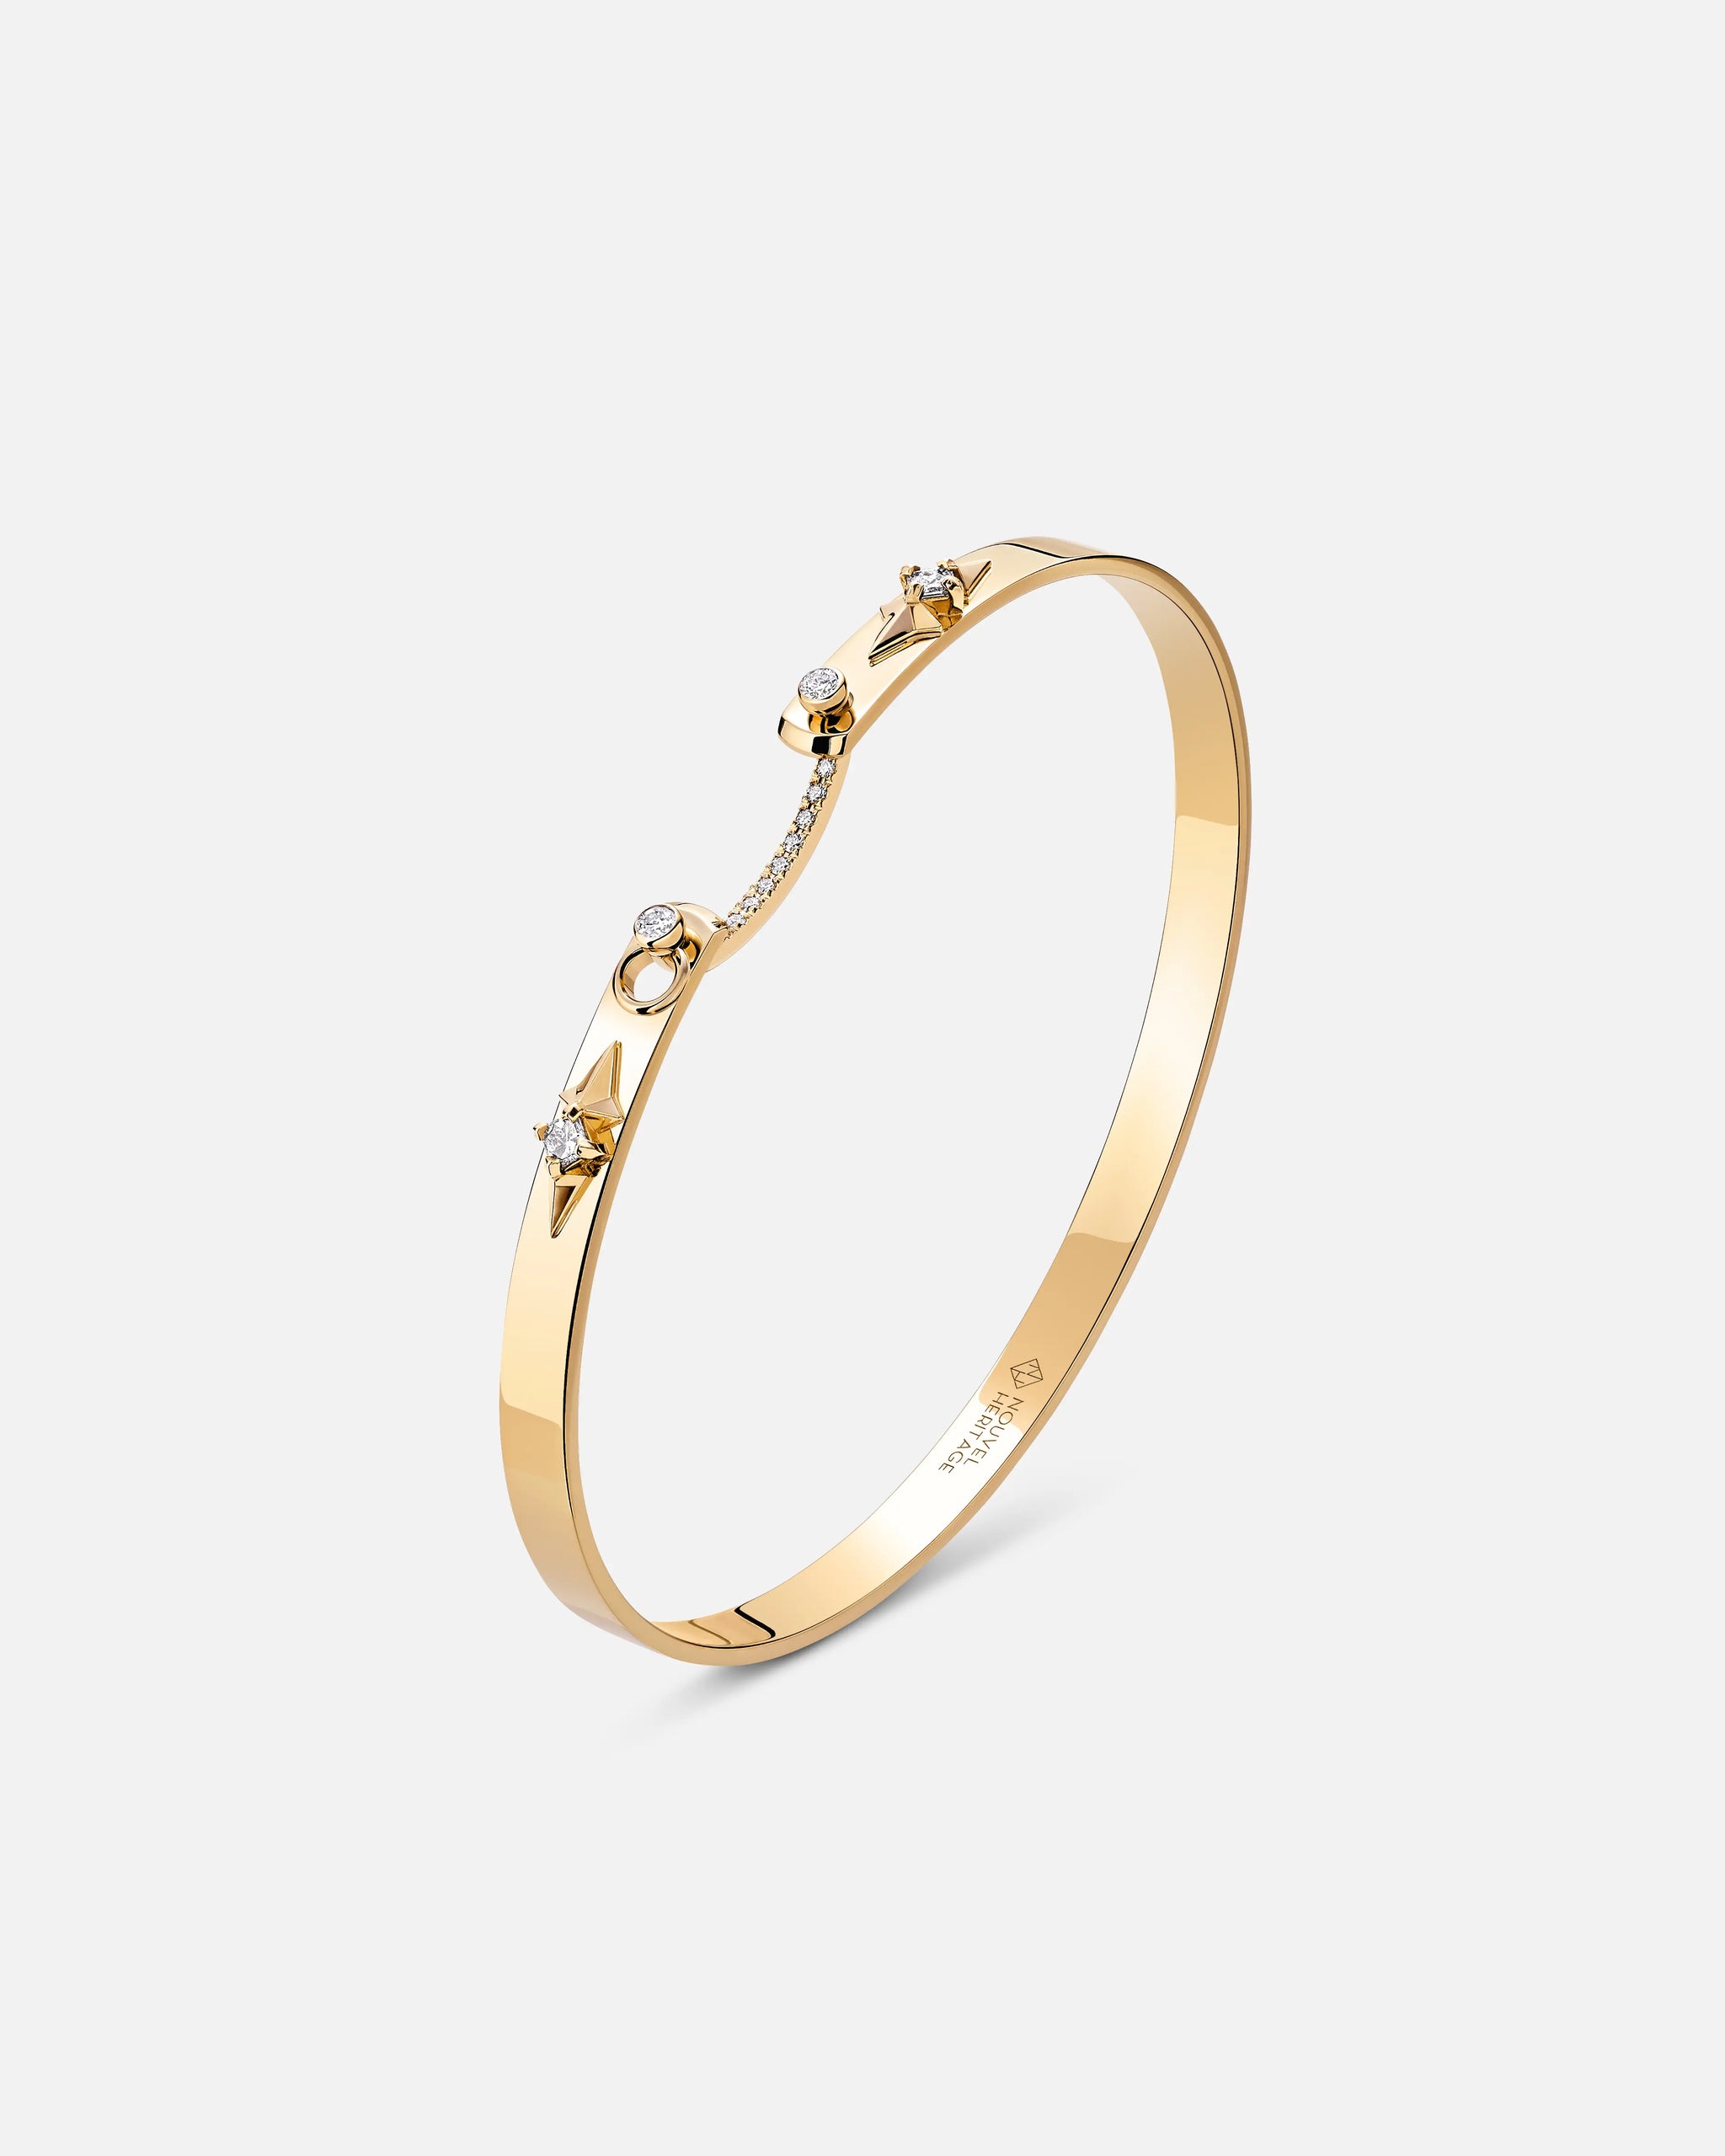 Reverie Mood Bangle in Yellow Gold - 1 - Nouvel Heritage